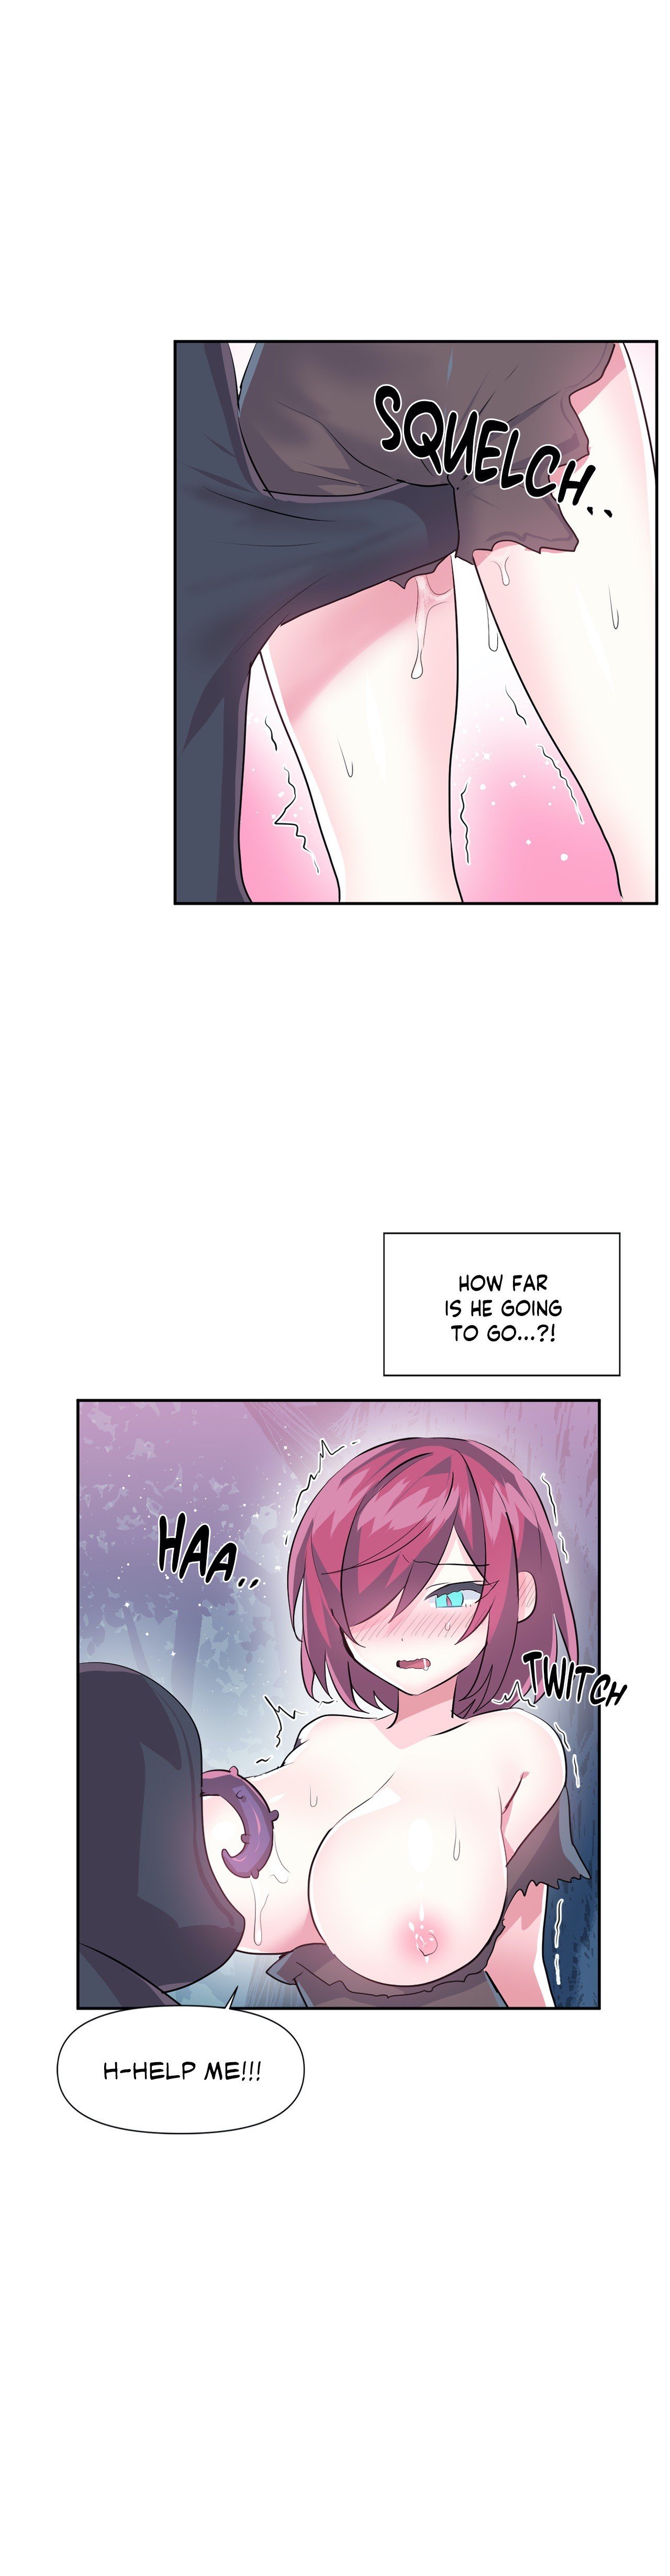 log-in-to-lust-a-land-chap-36-15